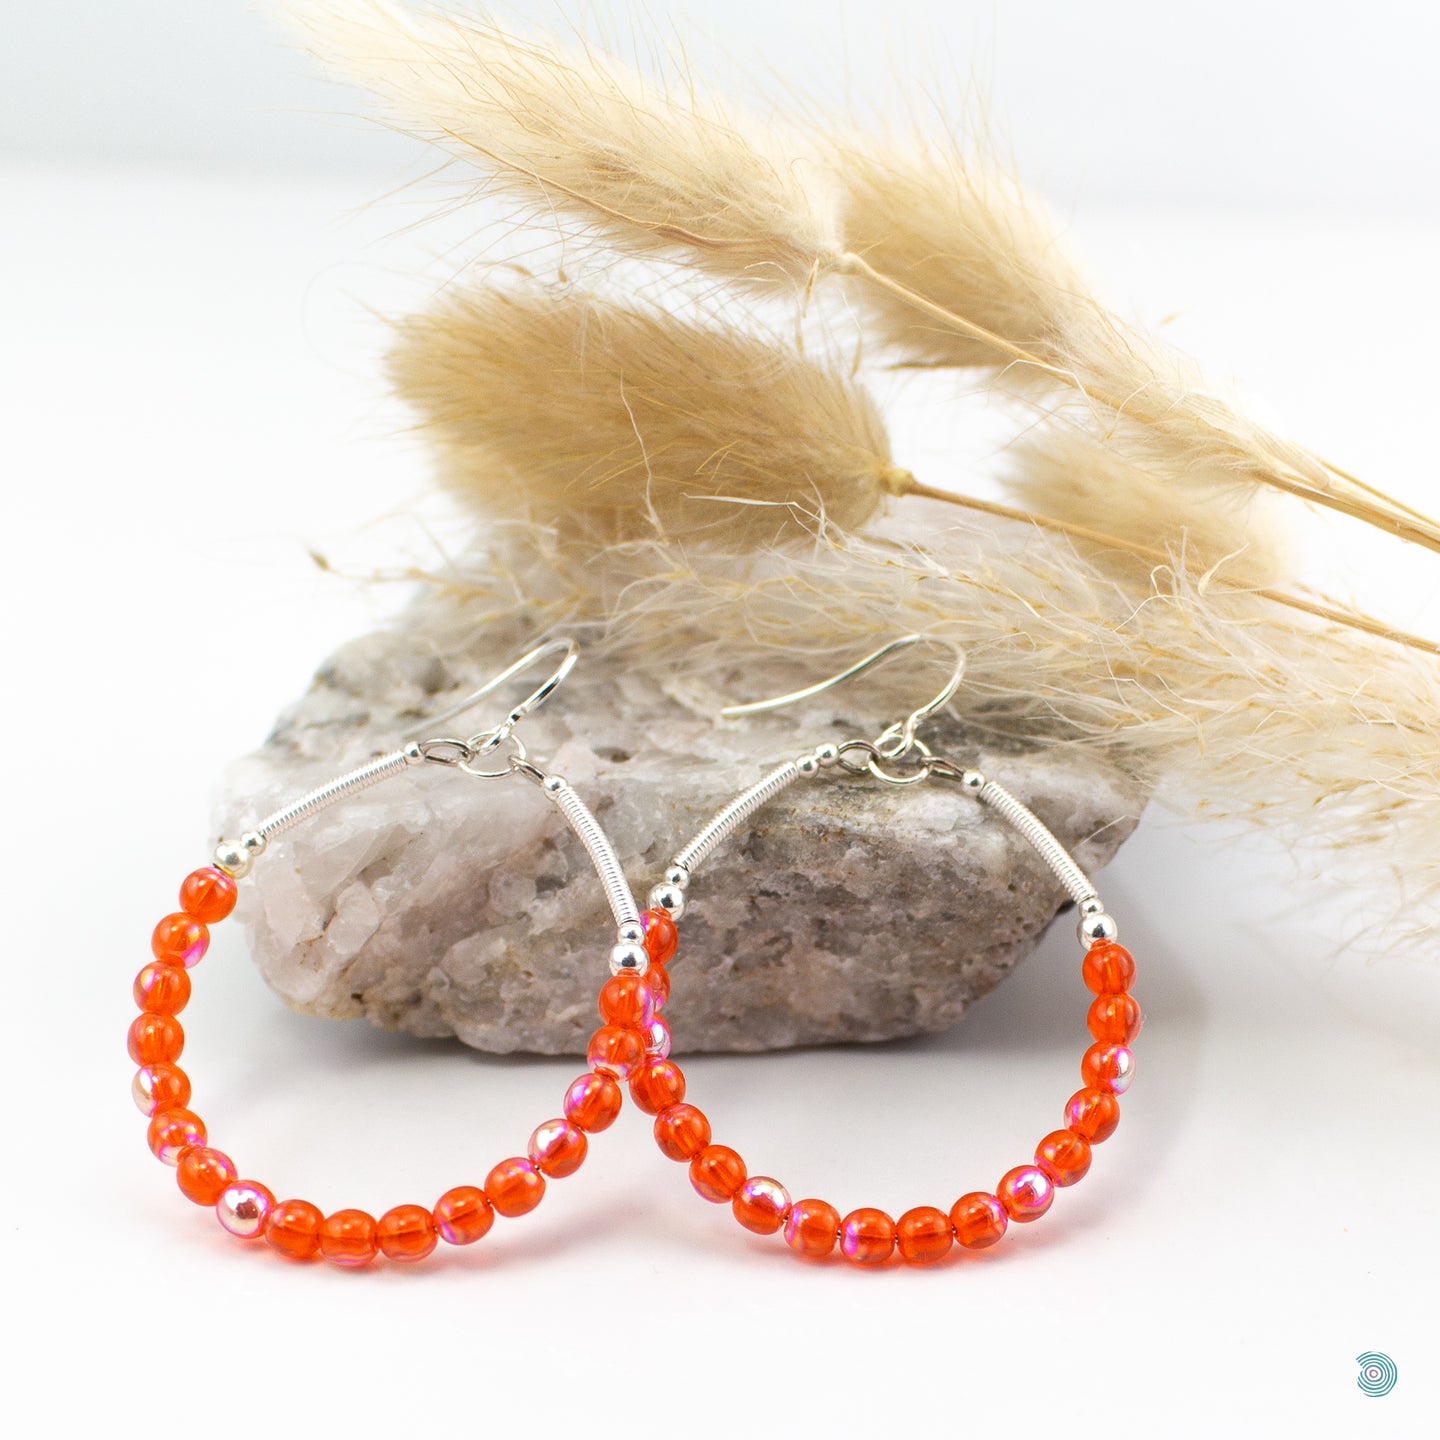 Handwrapped silver filled hoops with beautiful vibrant orange Czech glass 4mm beads on sterling silver ear wires. These earrings are lightweight, 5cm in drop length from the base of the earwires and 4cm in width. They come presented in a pretty gift pouch for safe keeping. Designed & Handmade in Dingle